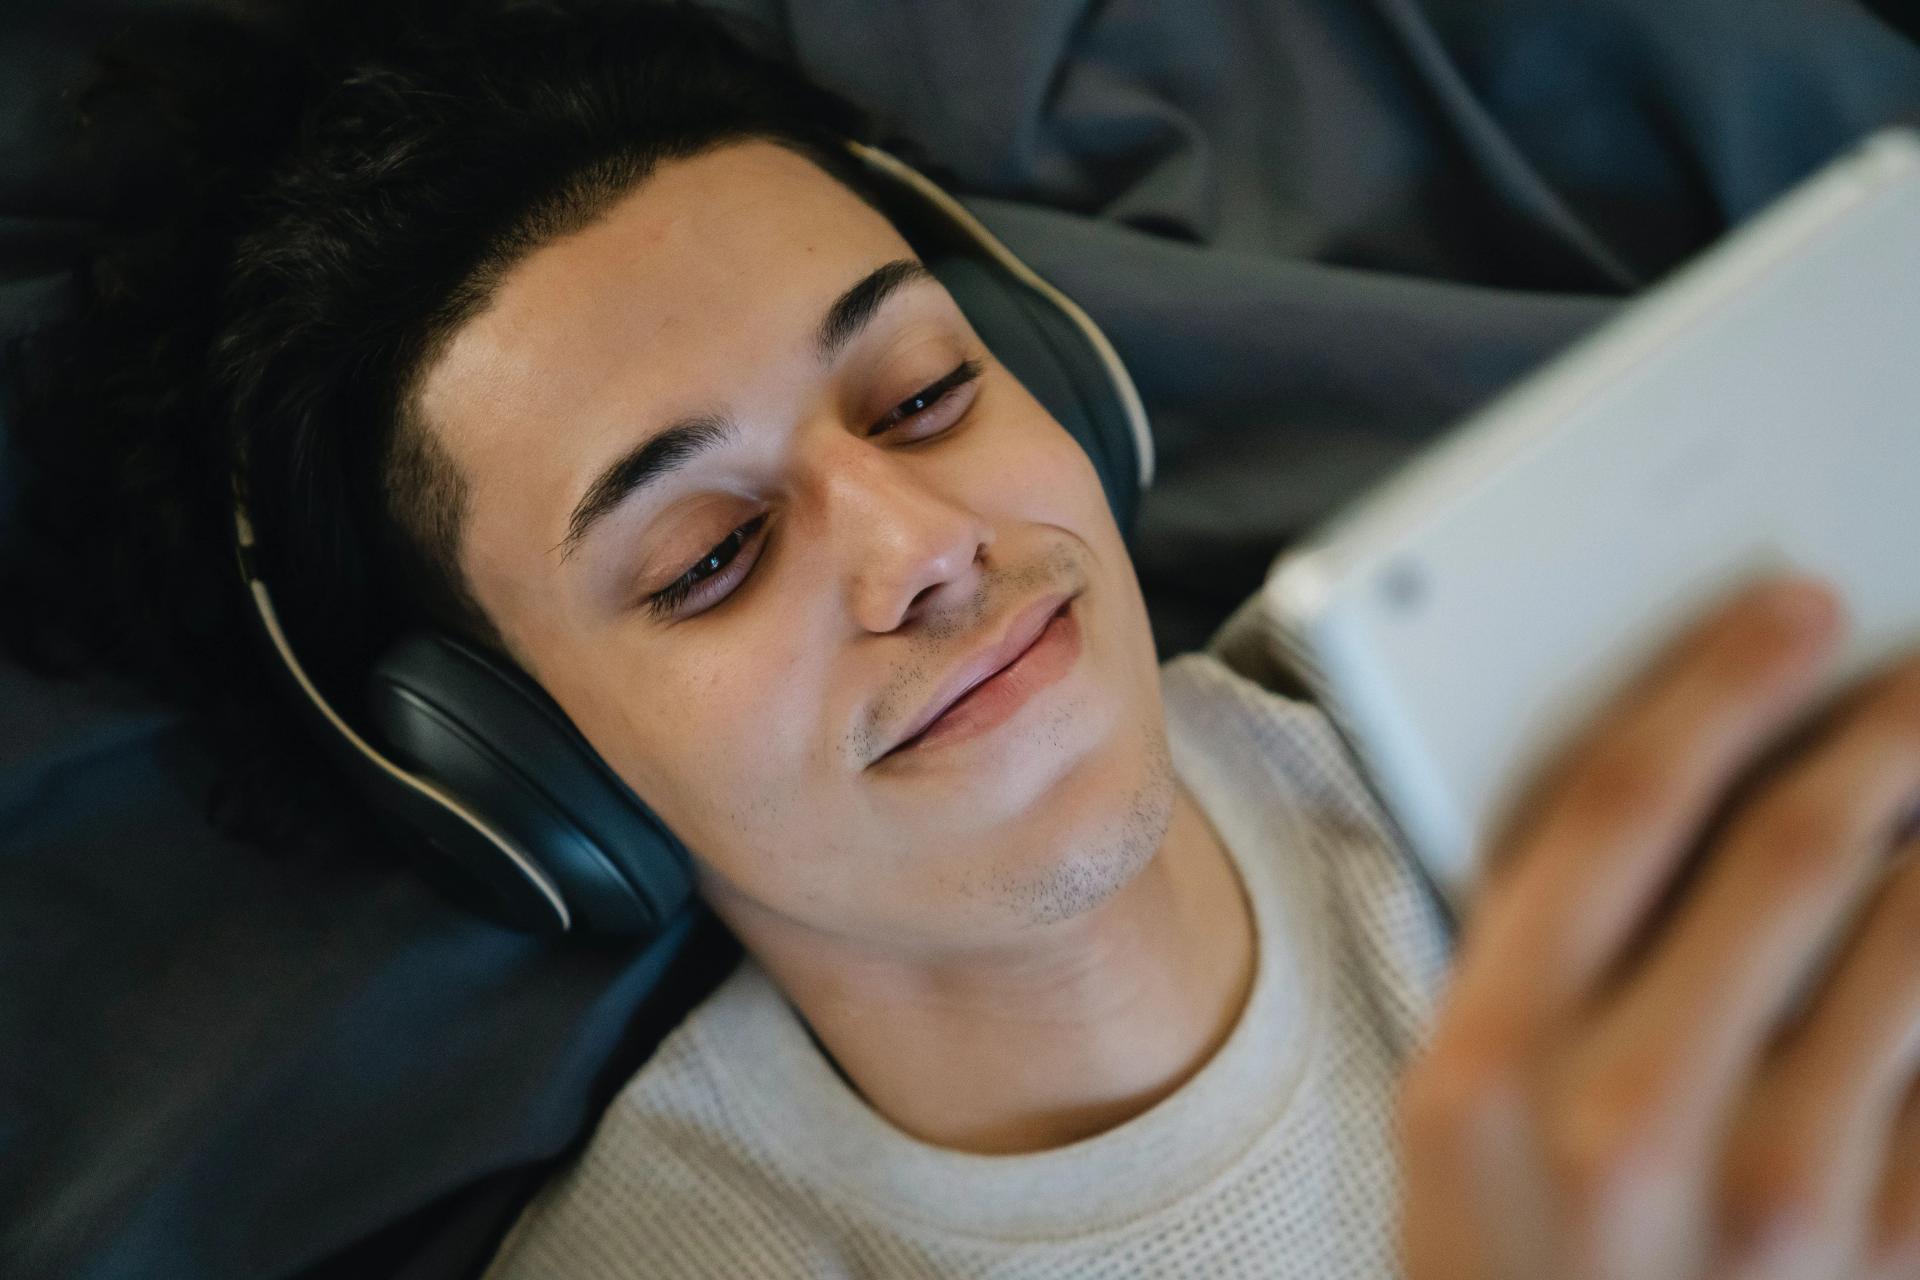 Comfortable in Bed with some Headphones